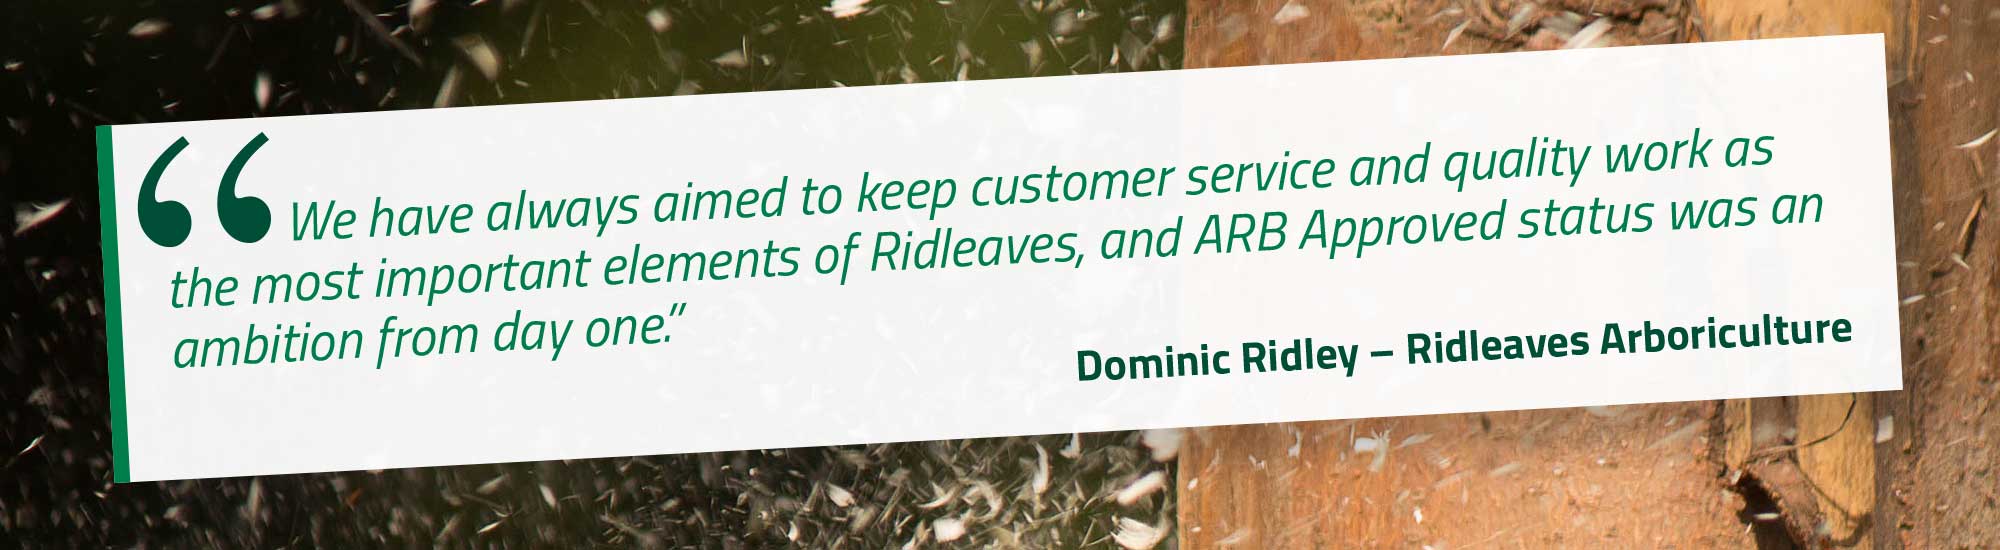 We have always aimed to keep customer service and quality work as the most important elements of Ridleaves, and ARB Approved status was an ambition from day one. Dominic Ridley – Ridleaves Arboriculture